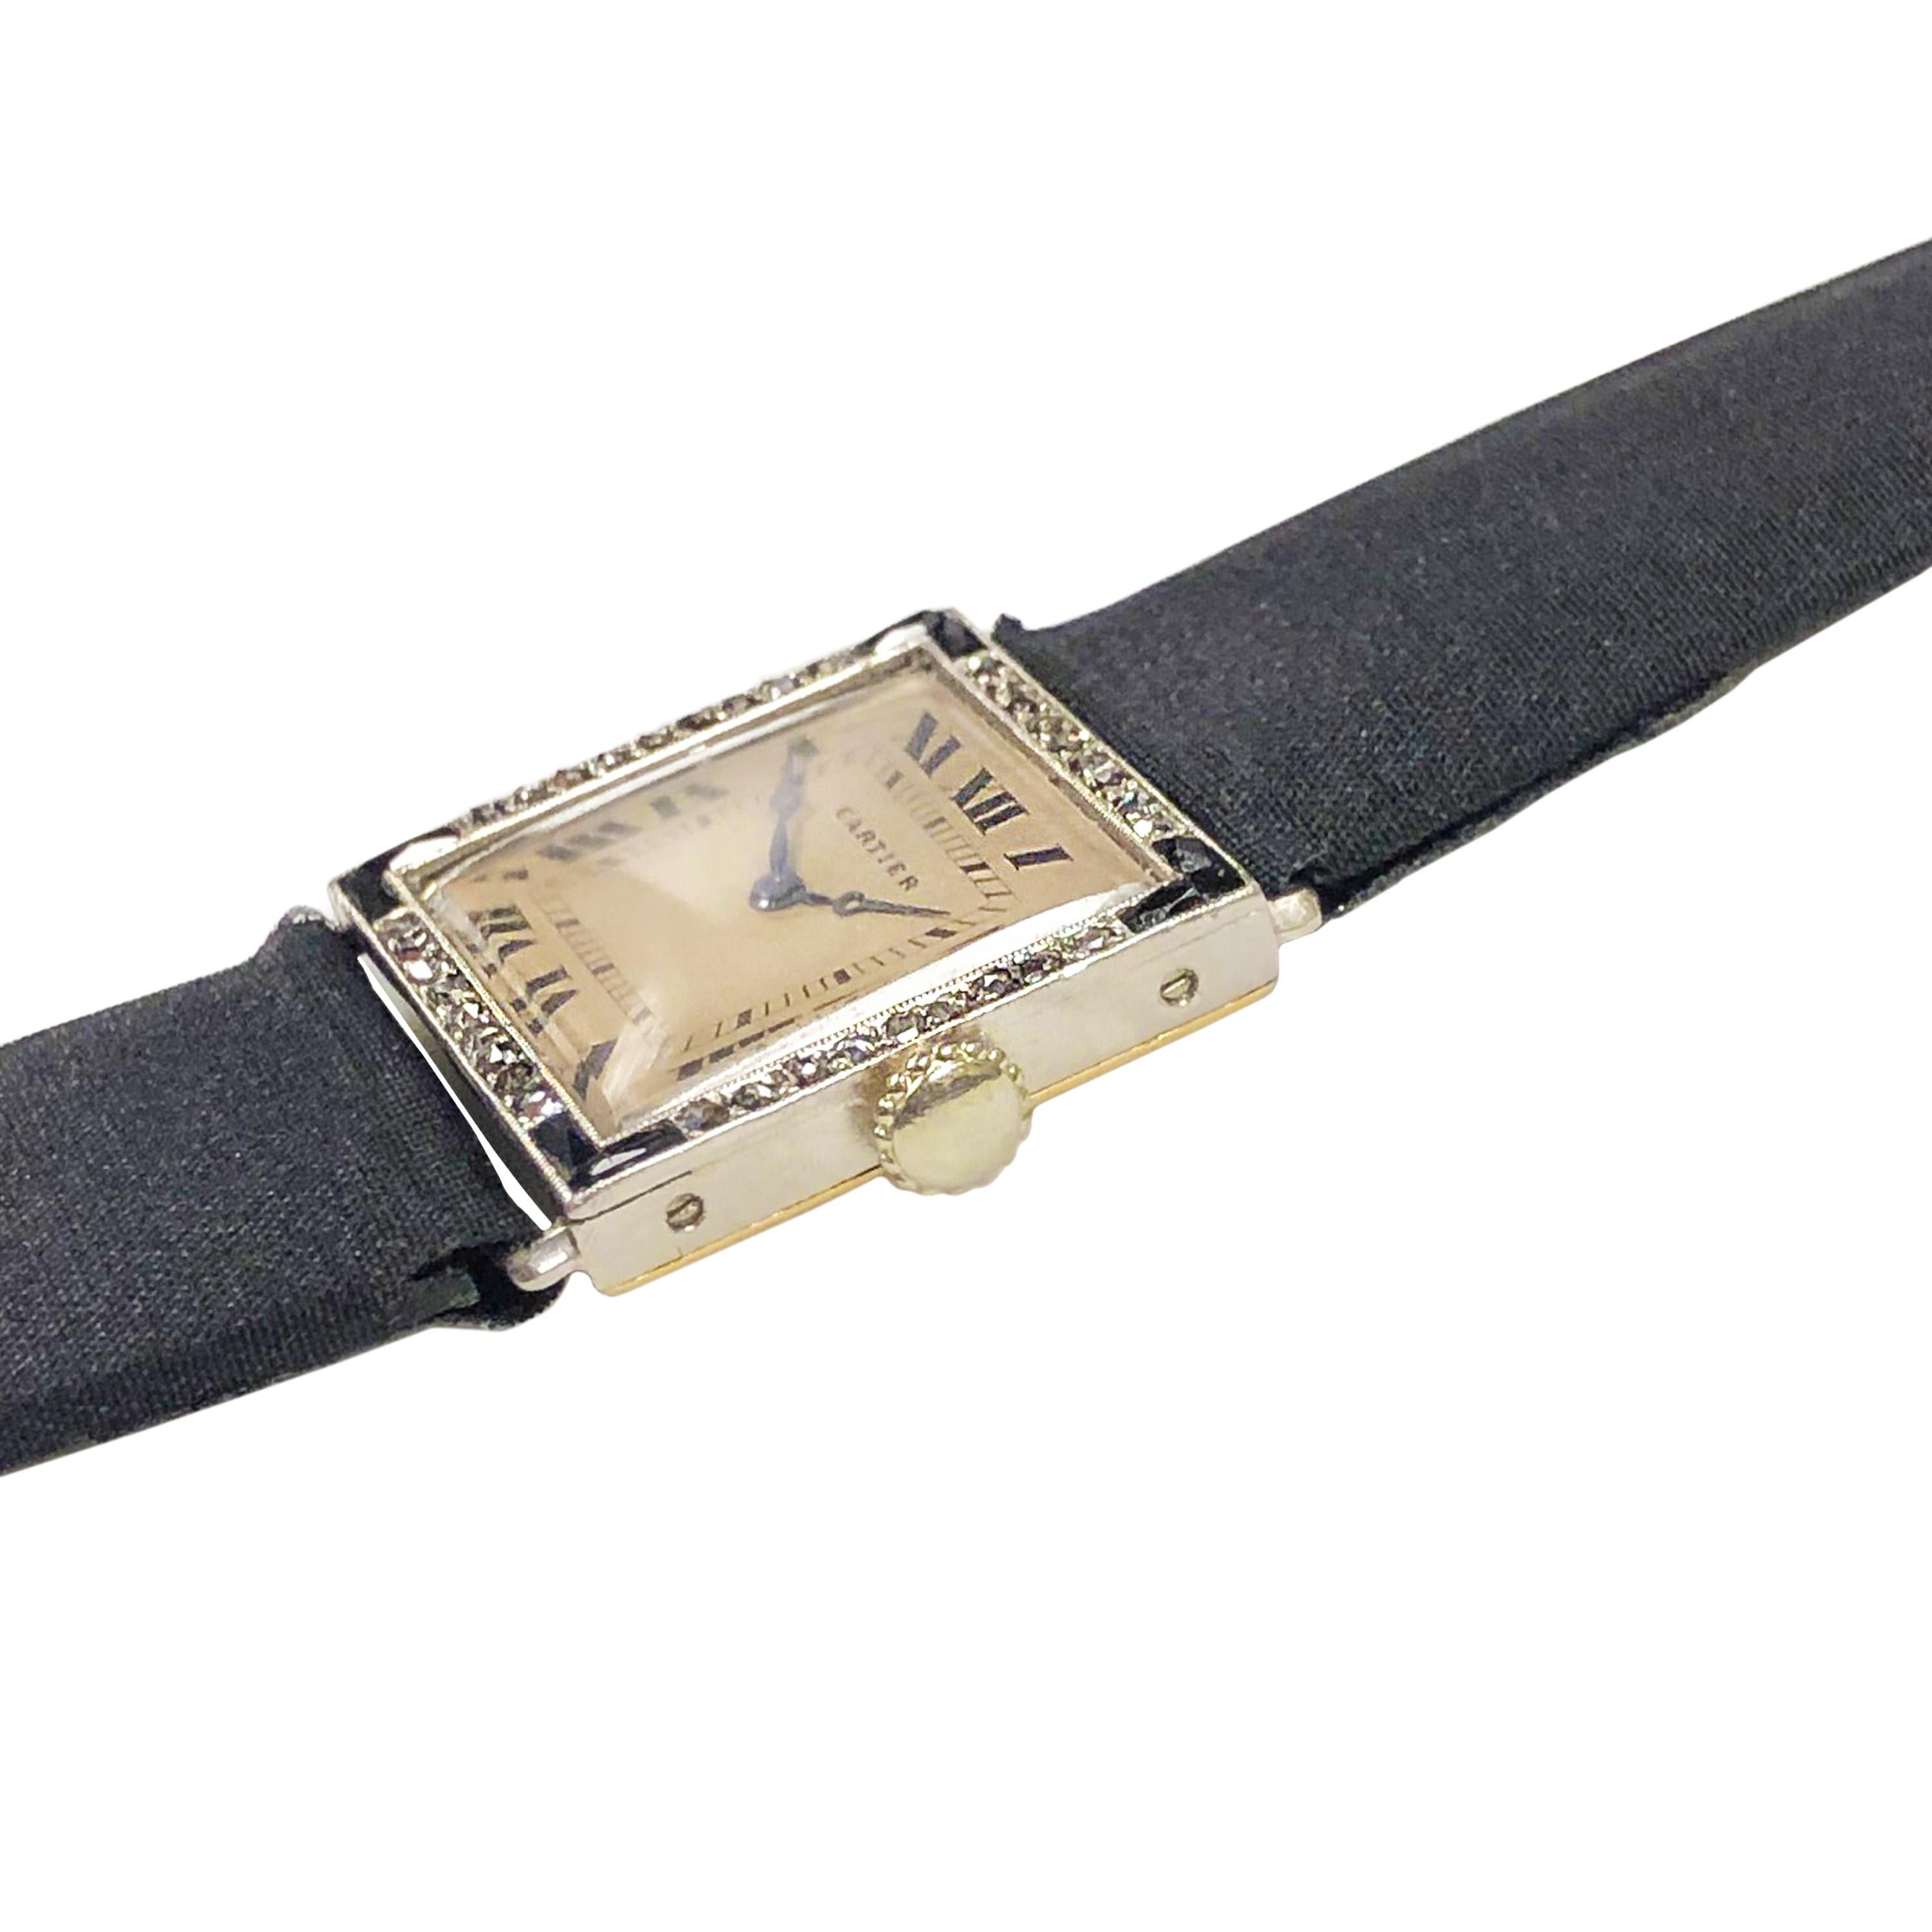 Circa 1920s Cartier Ladies Wrist Watch, 20 X 20 MM French Stamped and numbered Platinum Case with 18K Yellow Gold back, Rose cut Diamonds and Onyx set Bezel. 18 Jewel Mechanical, Manual Wind ( EWCC ) European Watch and Clock Company Movement.